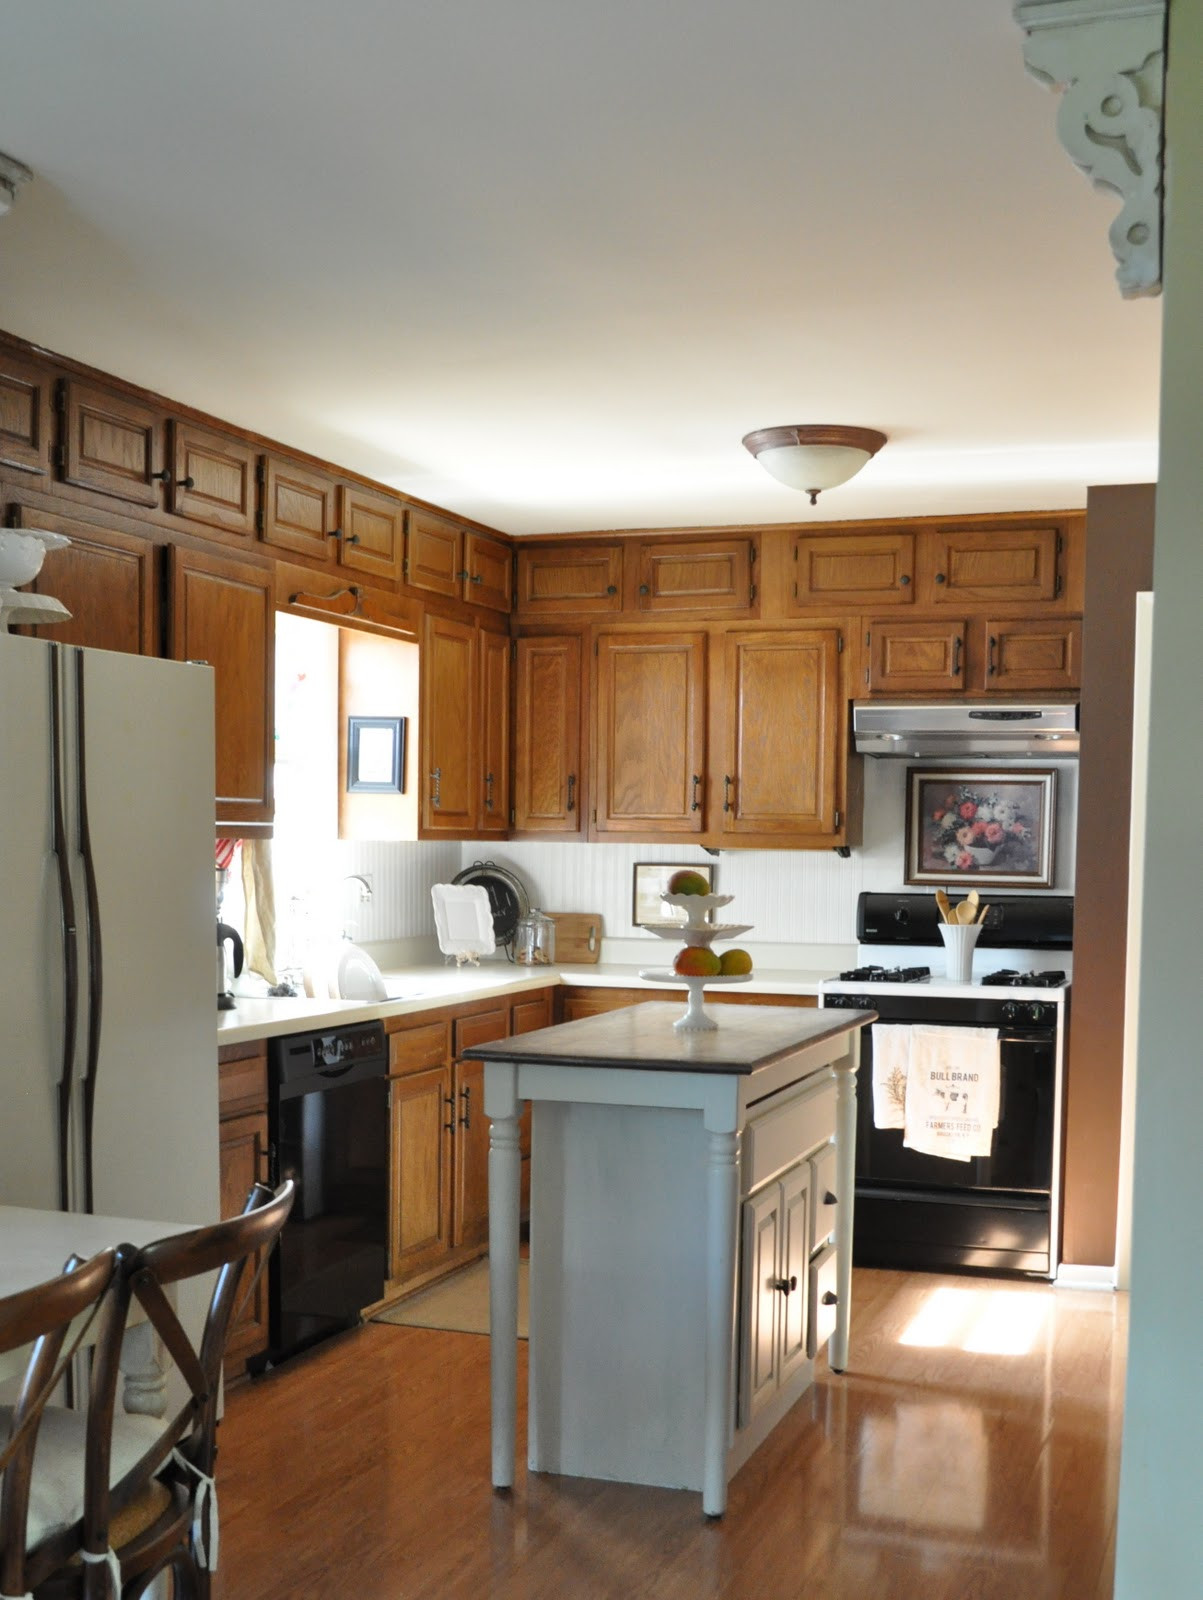 Kitchen Remodels With Oak Cabinets
 My plete kitchen remodel story for about $12 000